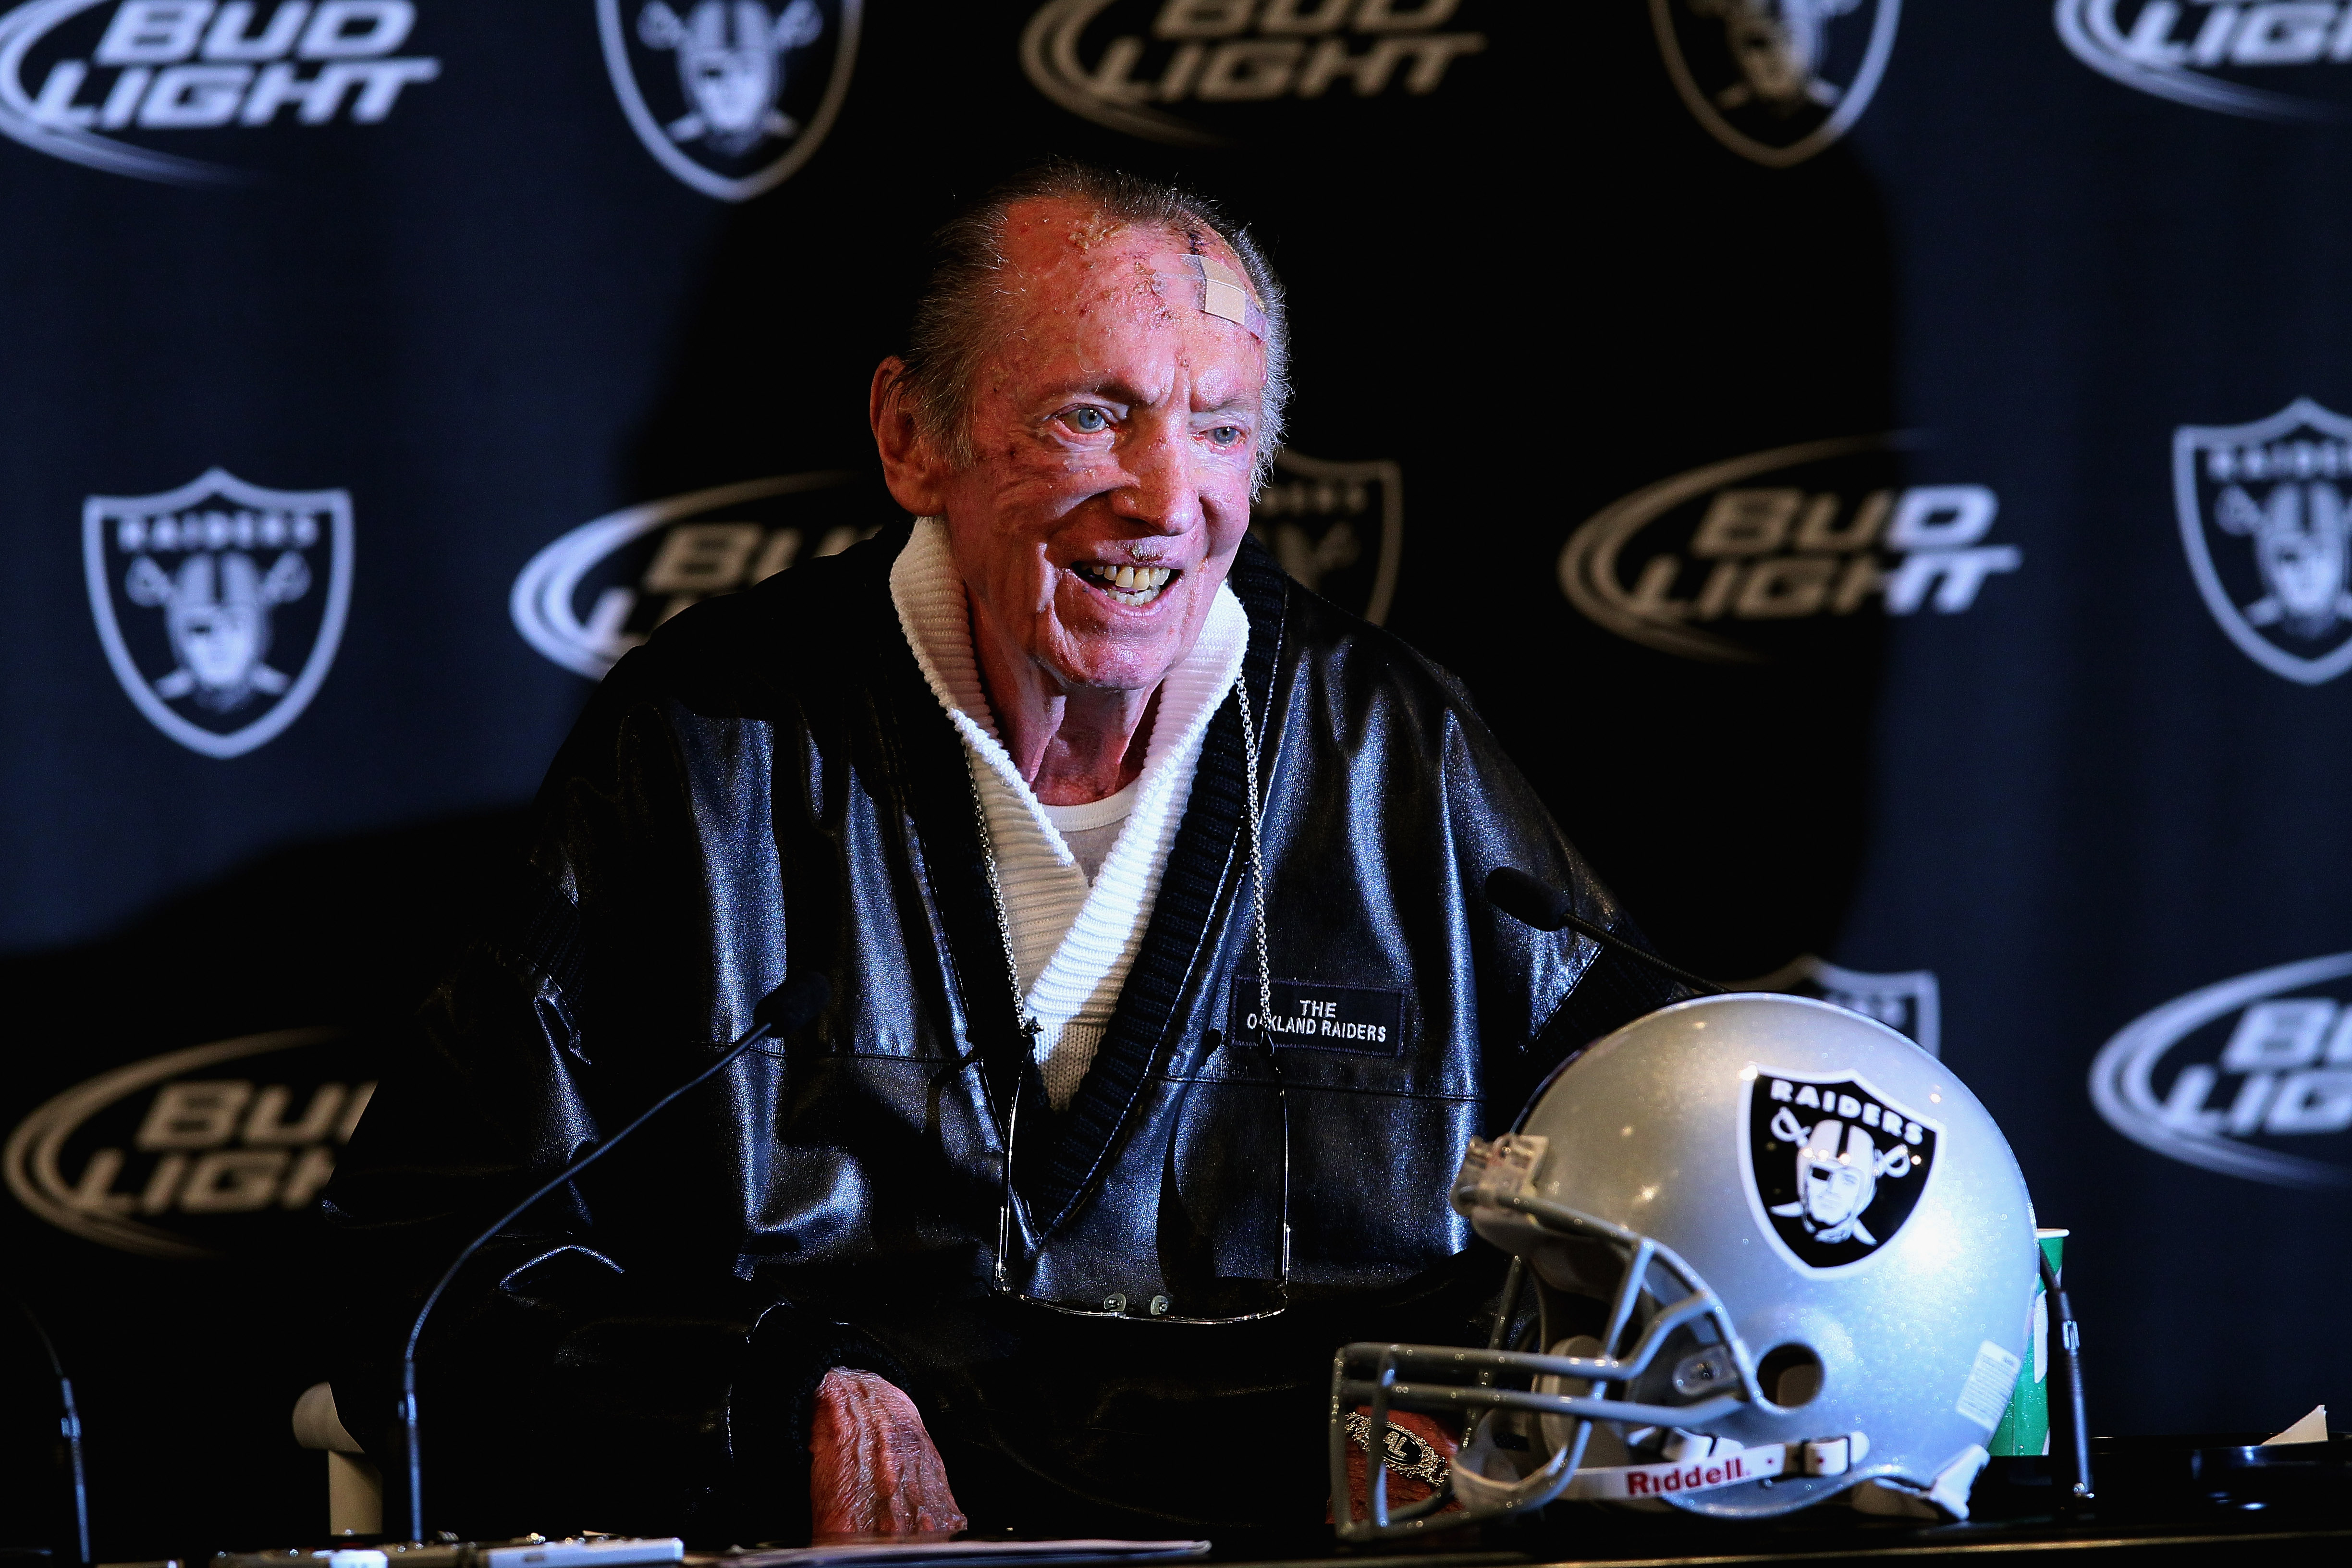 ALAMEDA, CA - JANUARY 18:  Oakland Raiders owner Al Davis speaks during a press conference on January 18, 2011 in Alameda, California. Hue Jackson was introduced as the new coach of the Oakland Raiders, replacing the fired Tom Cable.  (Photo by Justin Sul